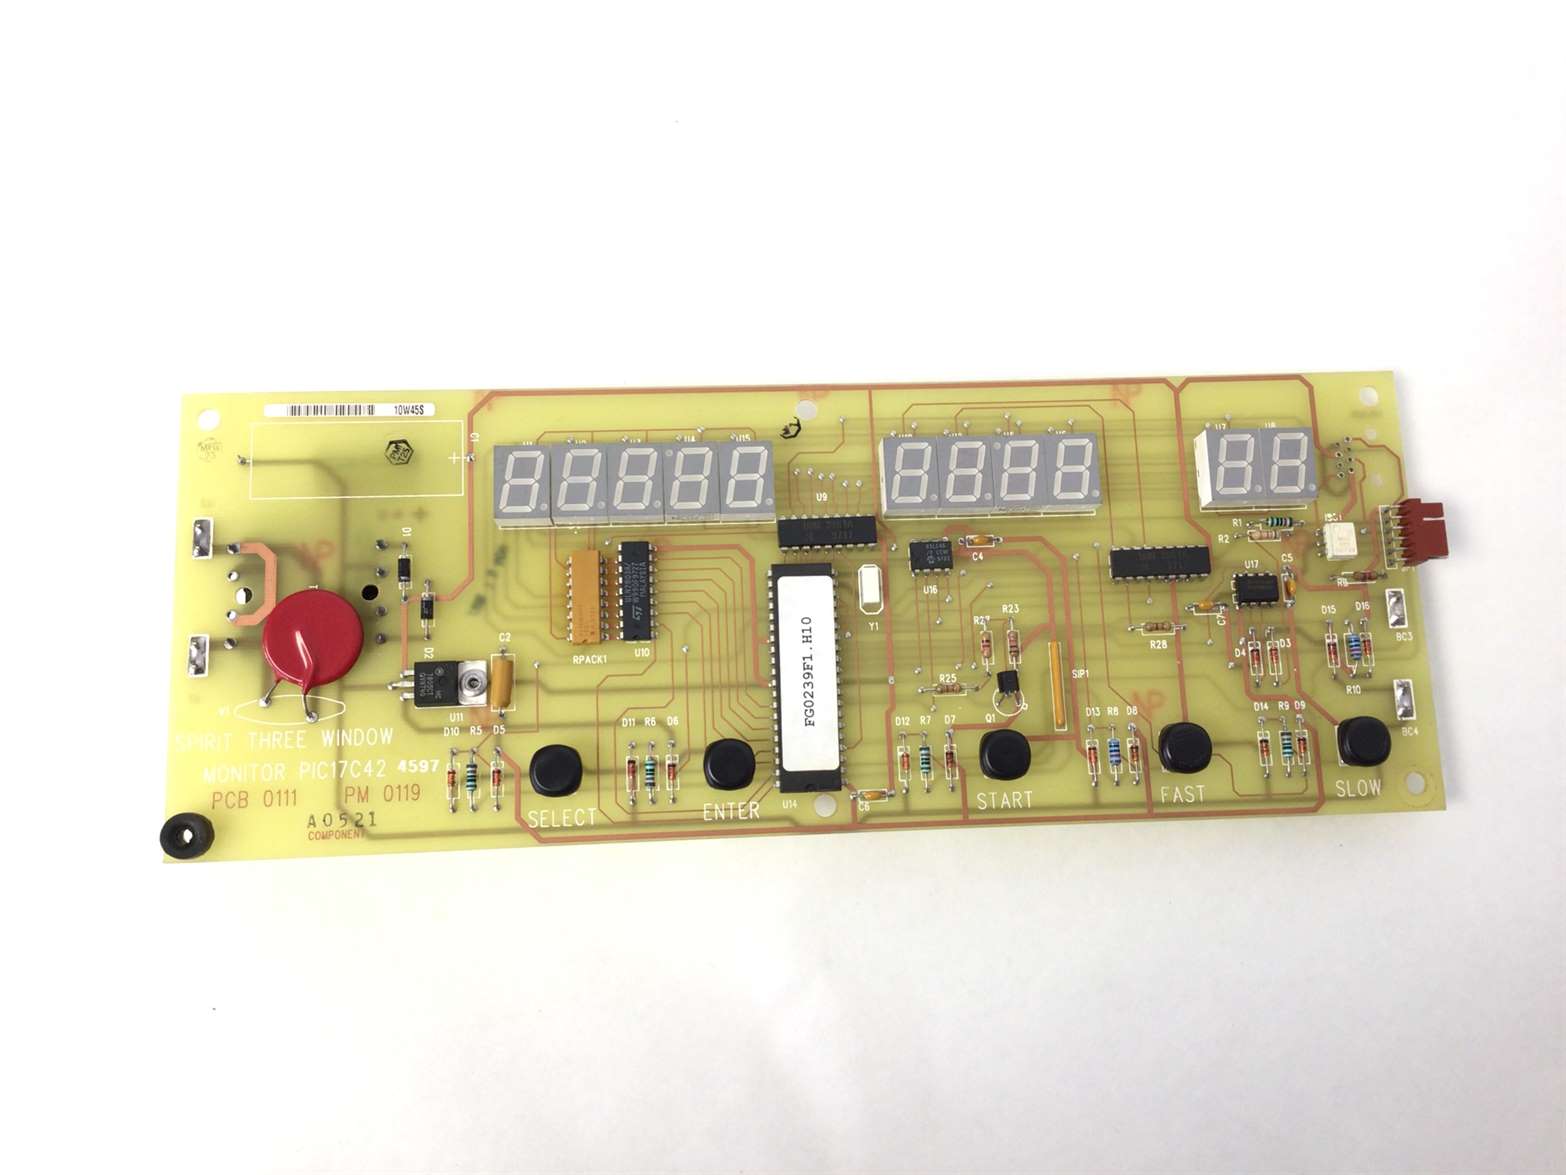 Speed Programmable Computer Board PCB 0111 (Used)